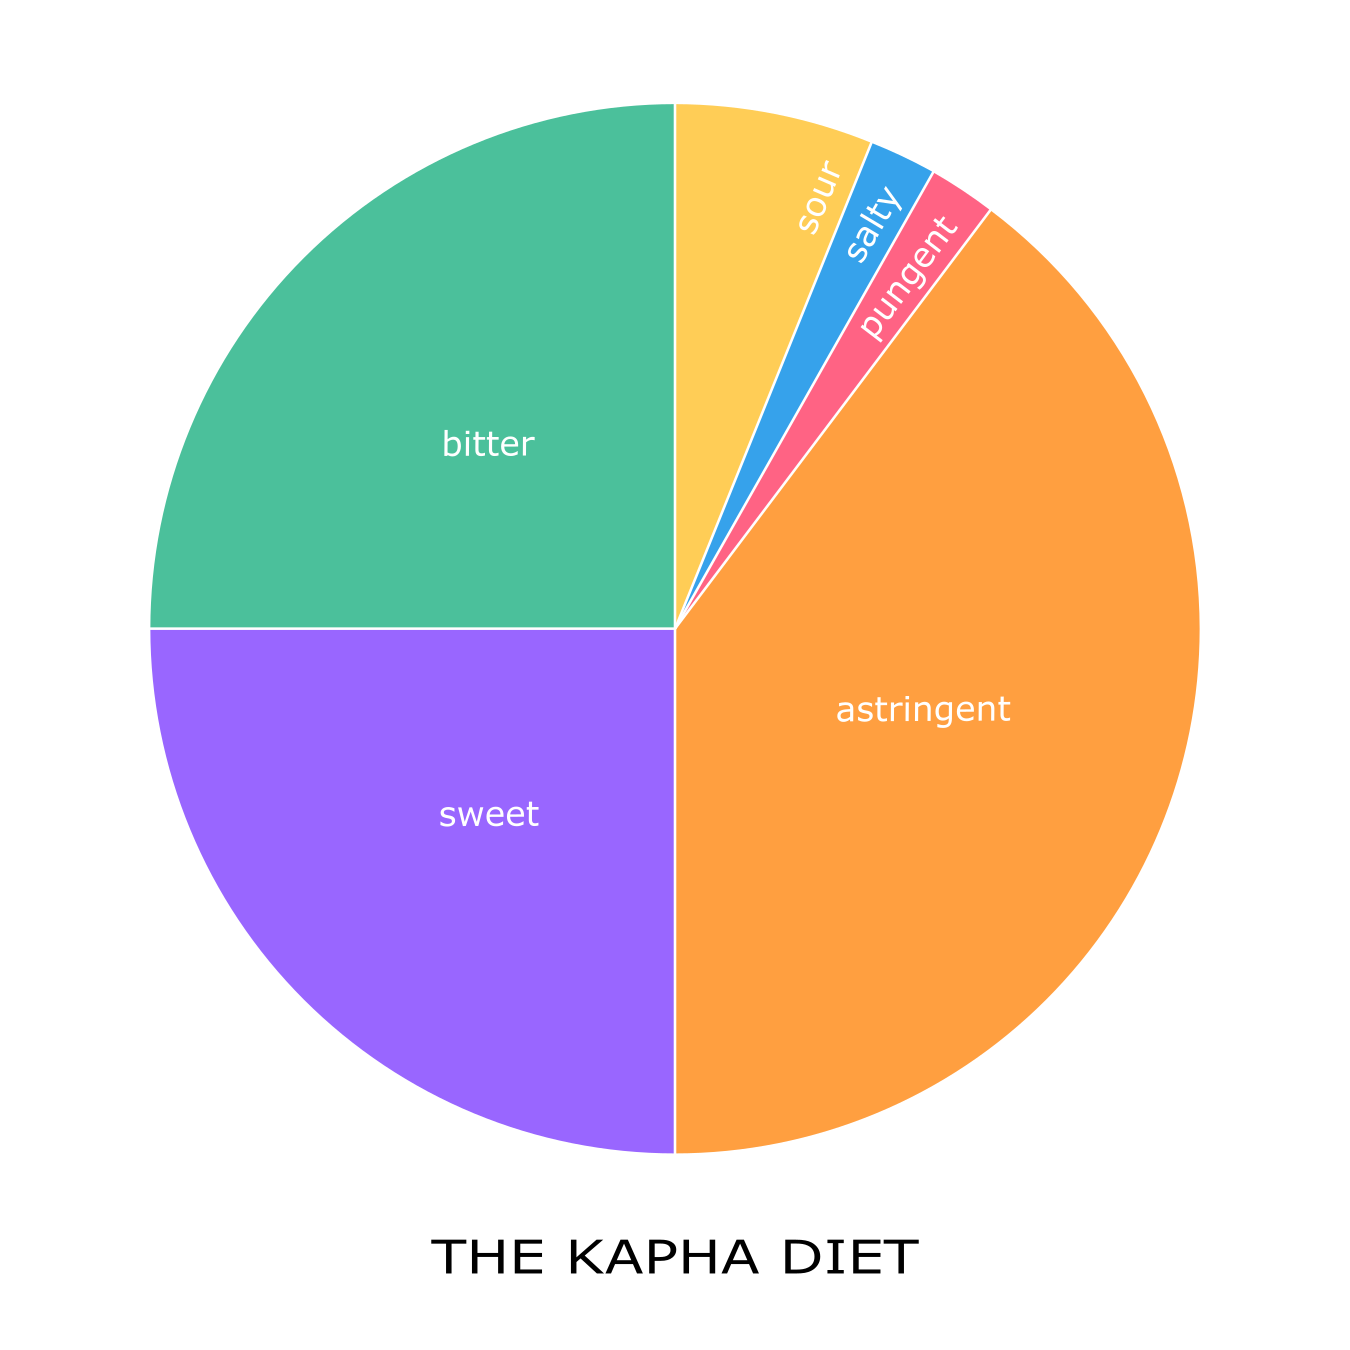 A colorful pie chart that shows the recommended intake of the six flavors for KAPHA according to Ayurveda.